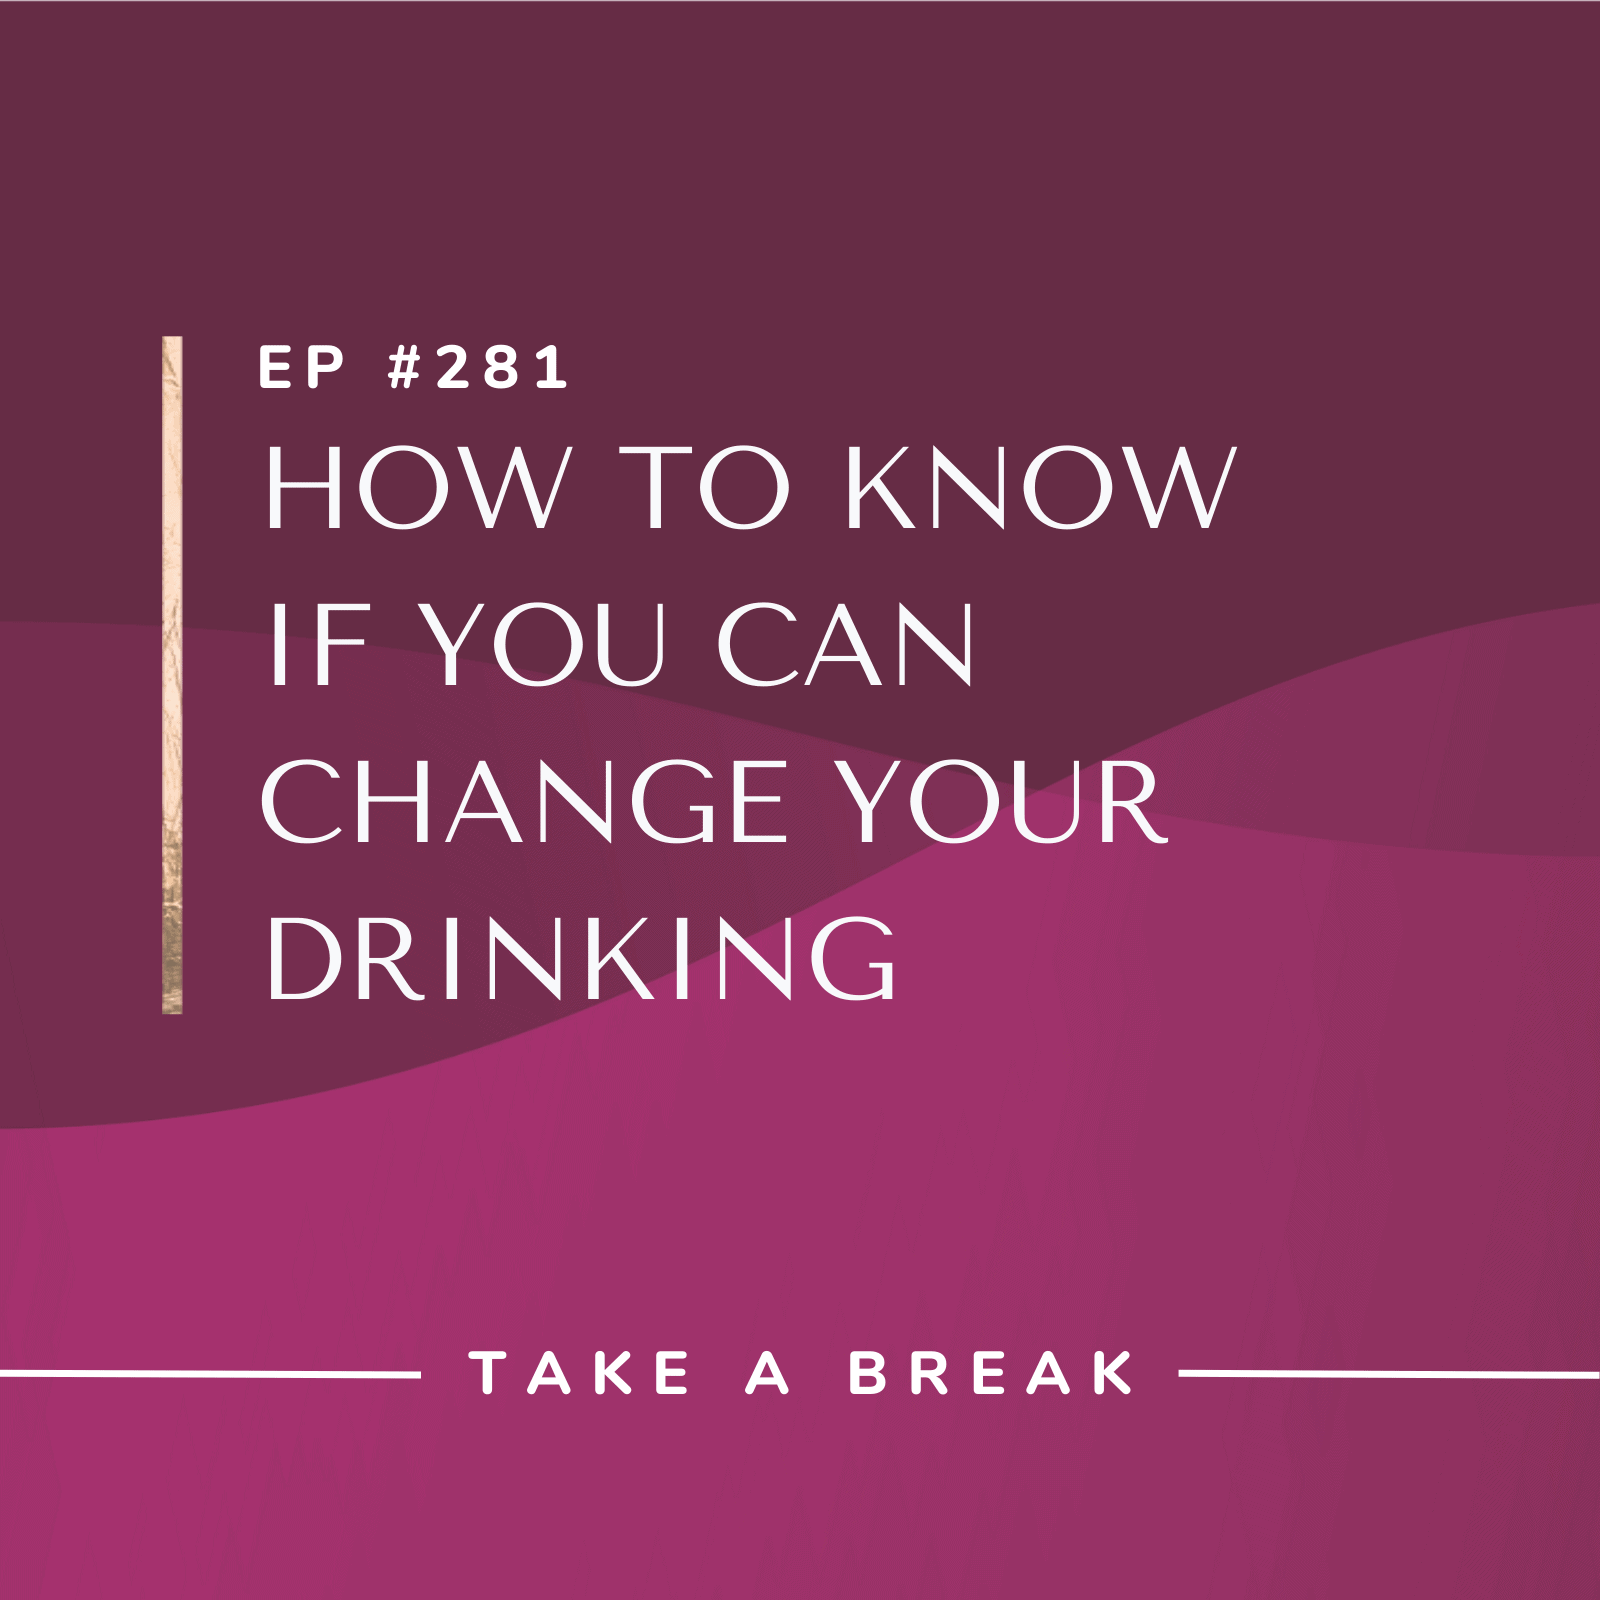 Take A Break from Drinking How to Know if You Can Change Your Drinking